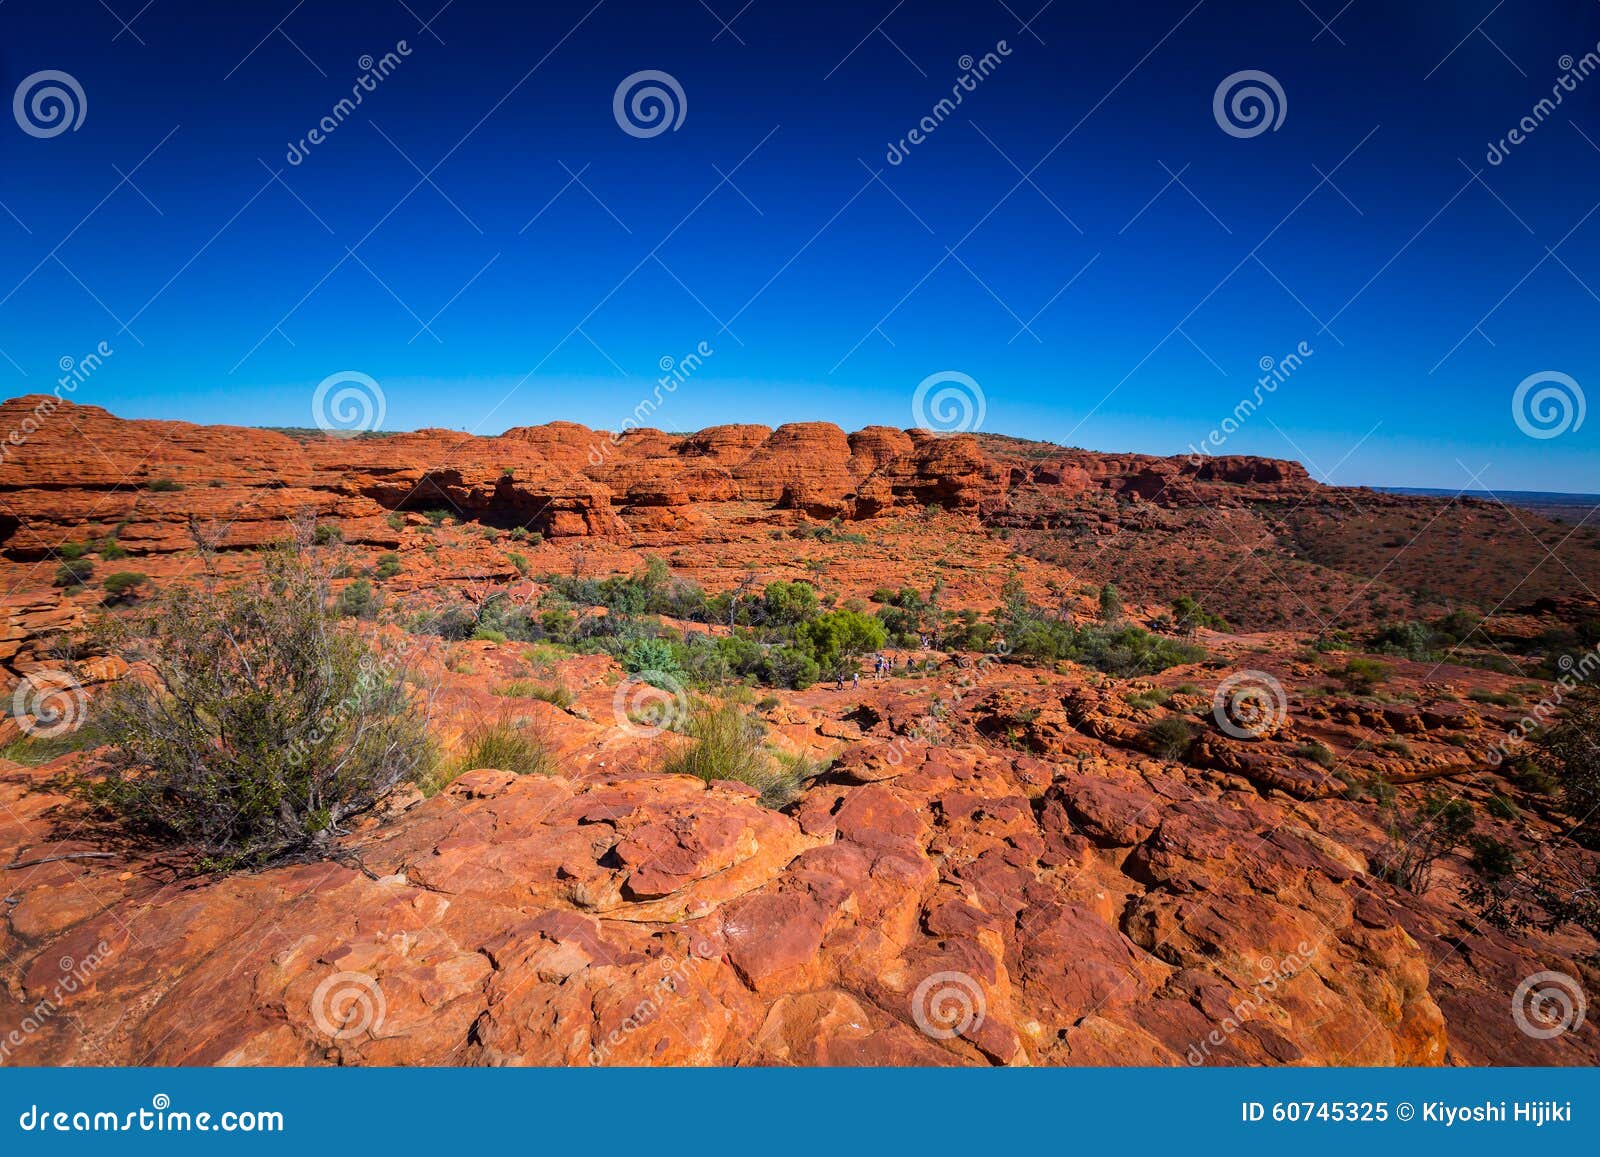 landscape view at kings canyon, australia outback